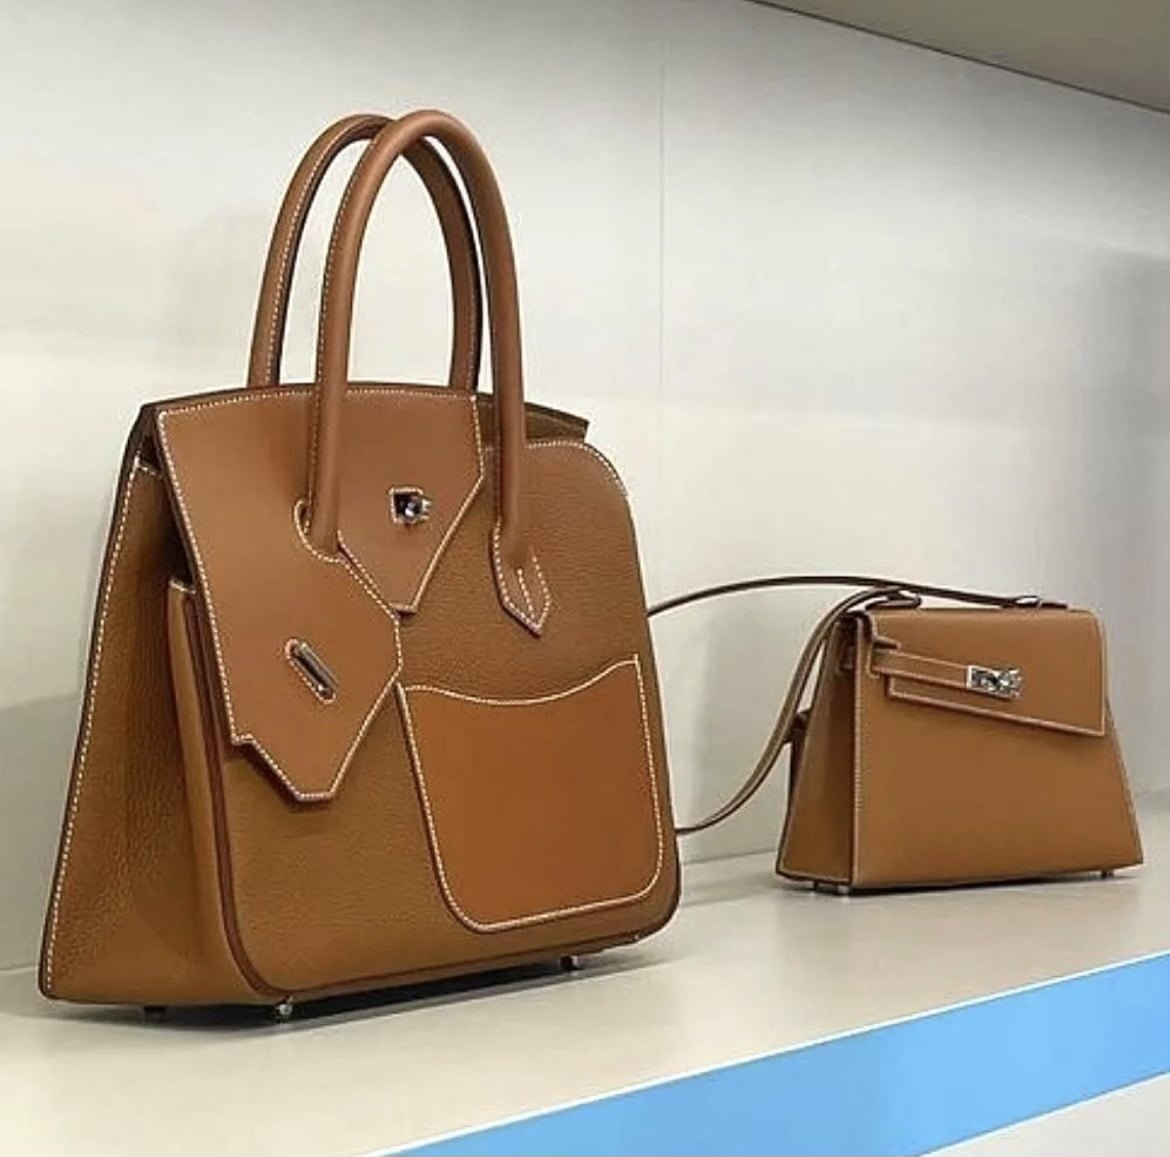 Hermes Bag Names 2022 — Collecting Luxury  Purses and handbags, Hermes  handbags, Hermes bags